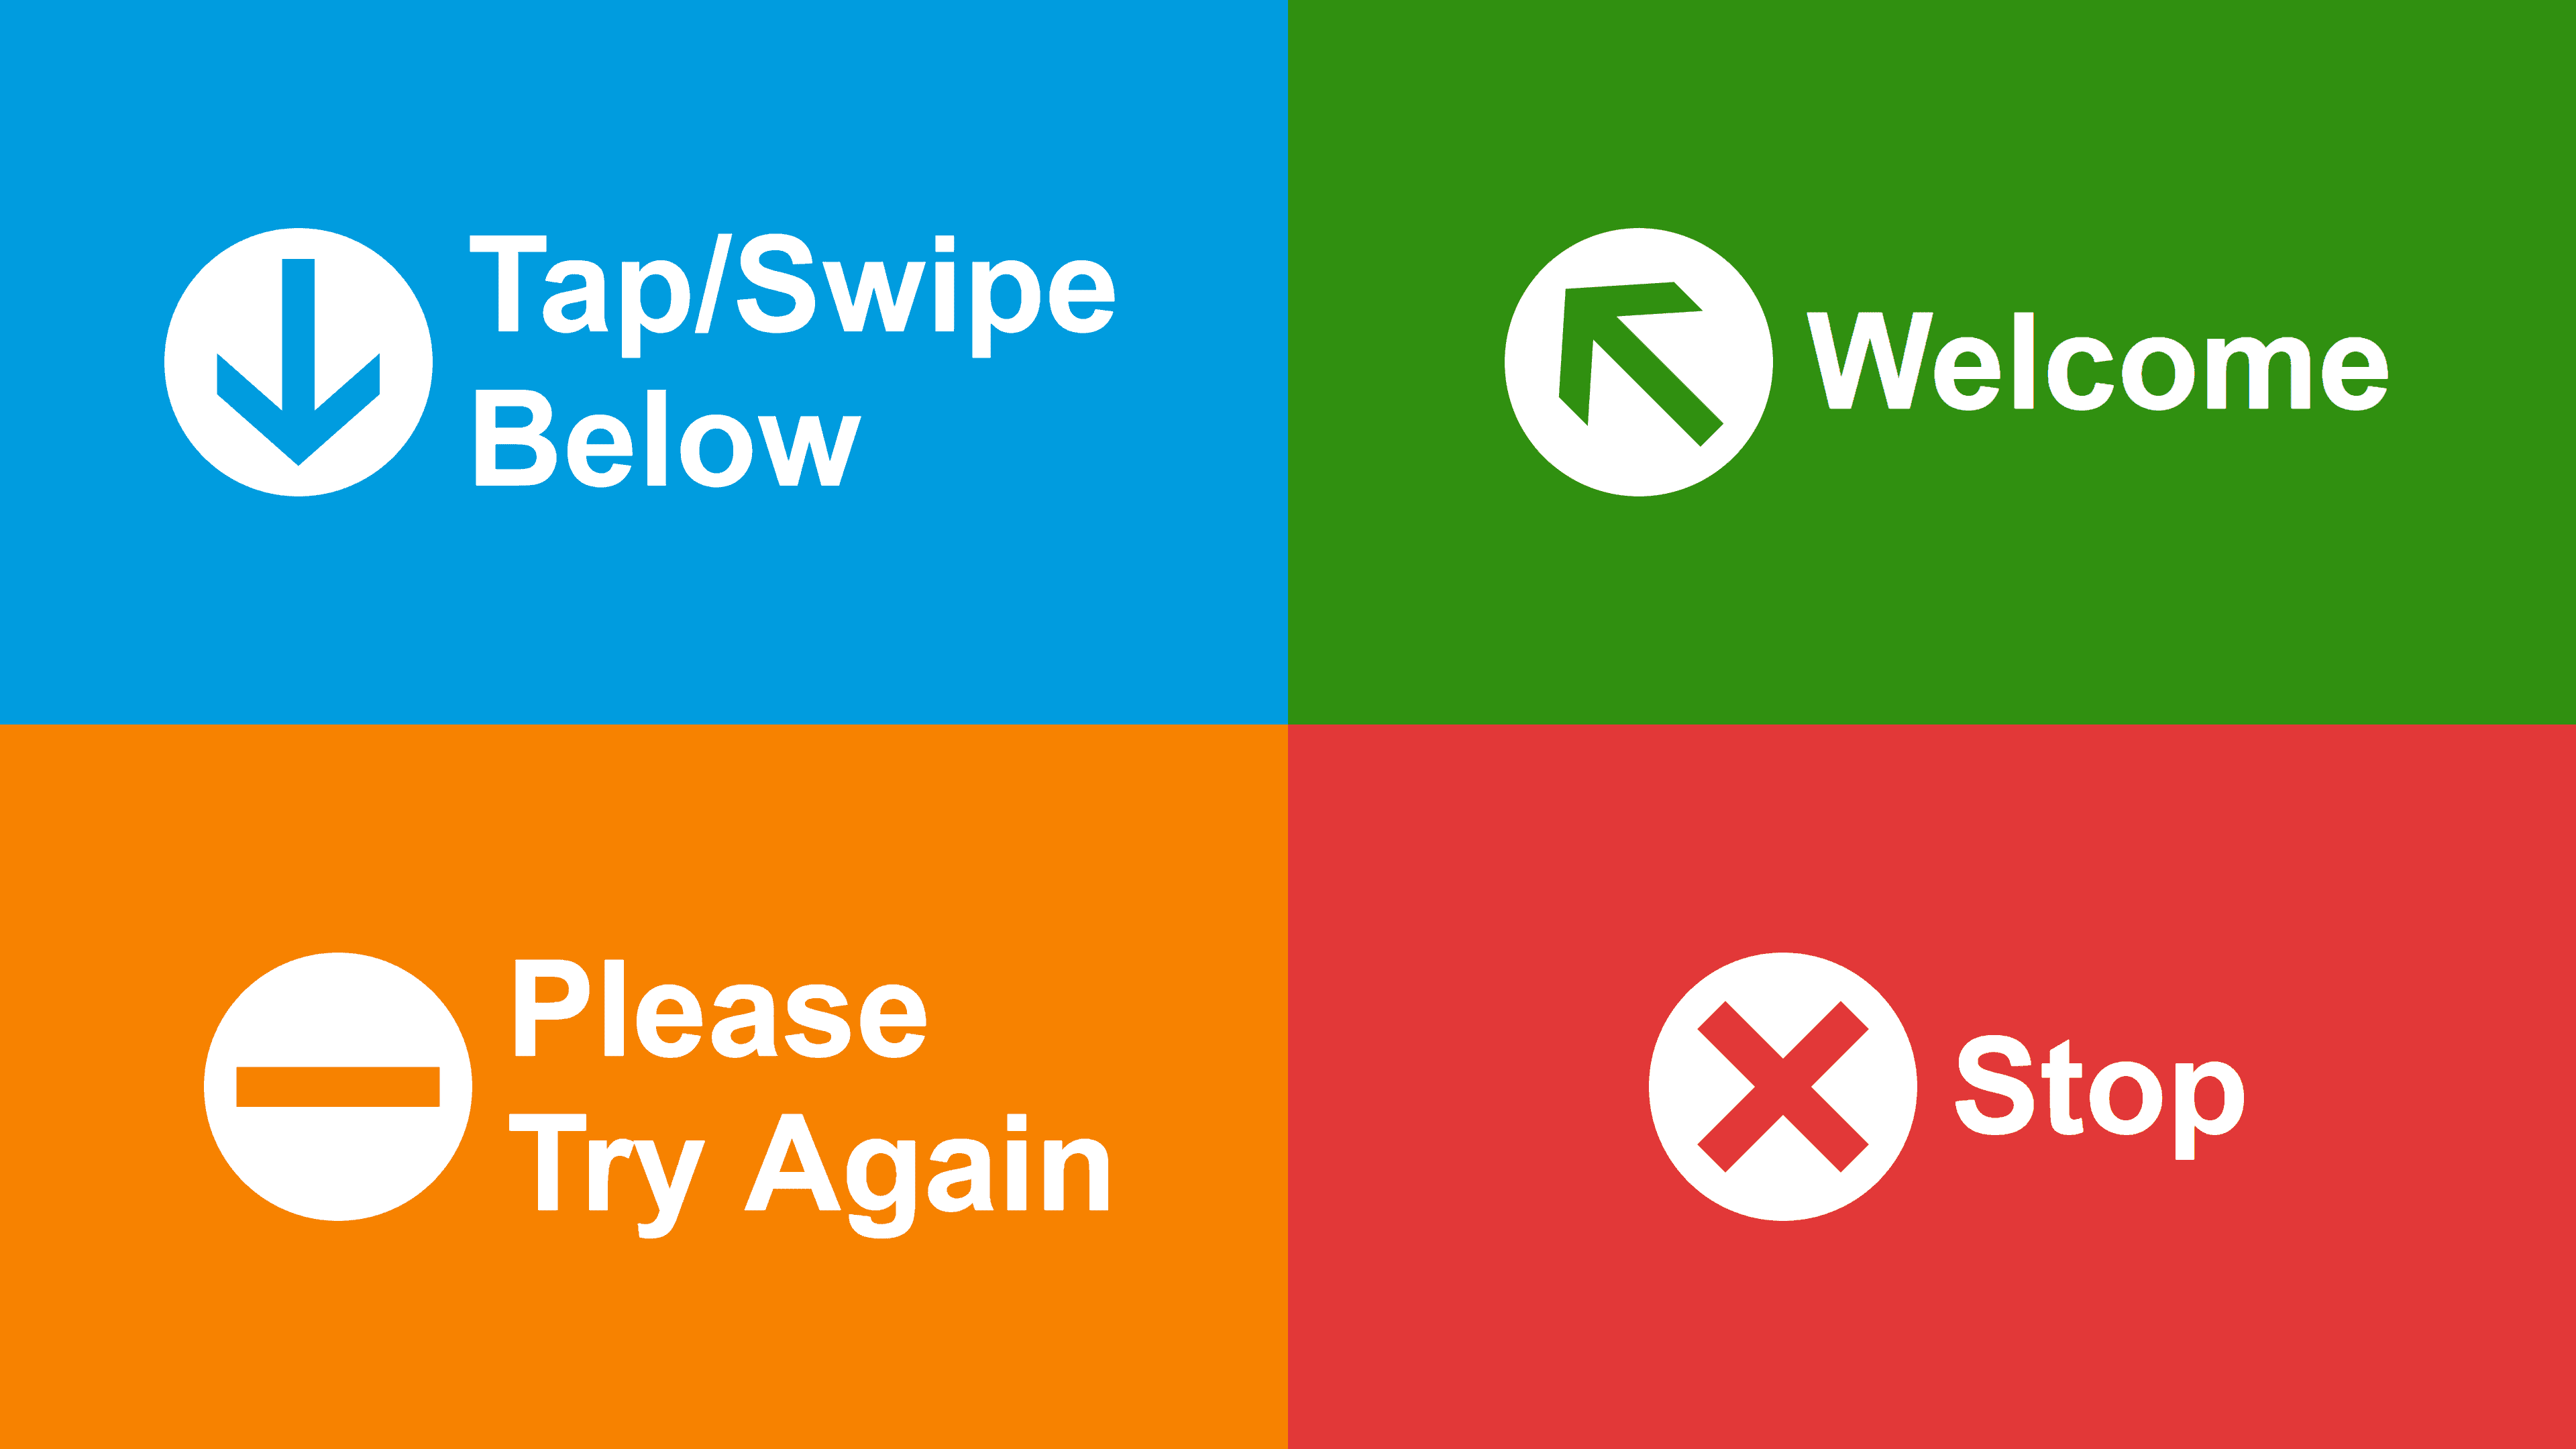 4 colored screens: tap/swipe below (blue), welcome (green), please try again (orange), and stop (red)